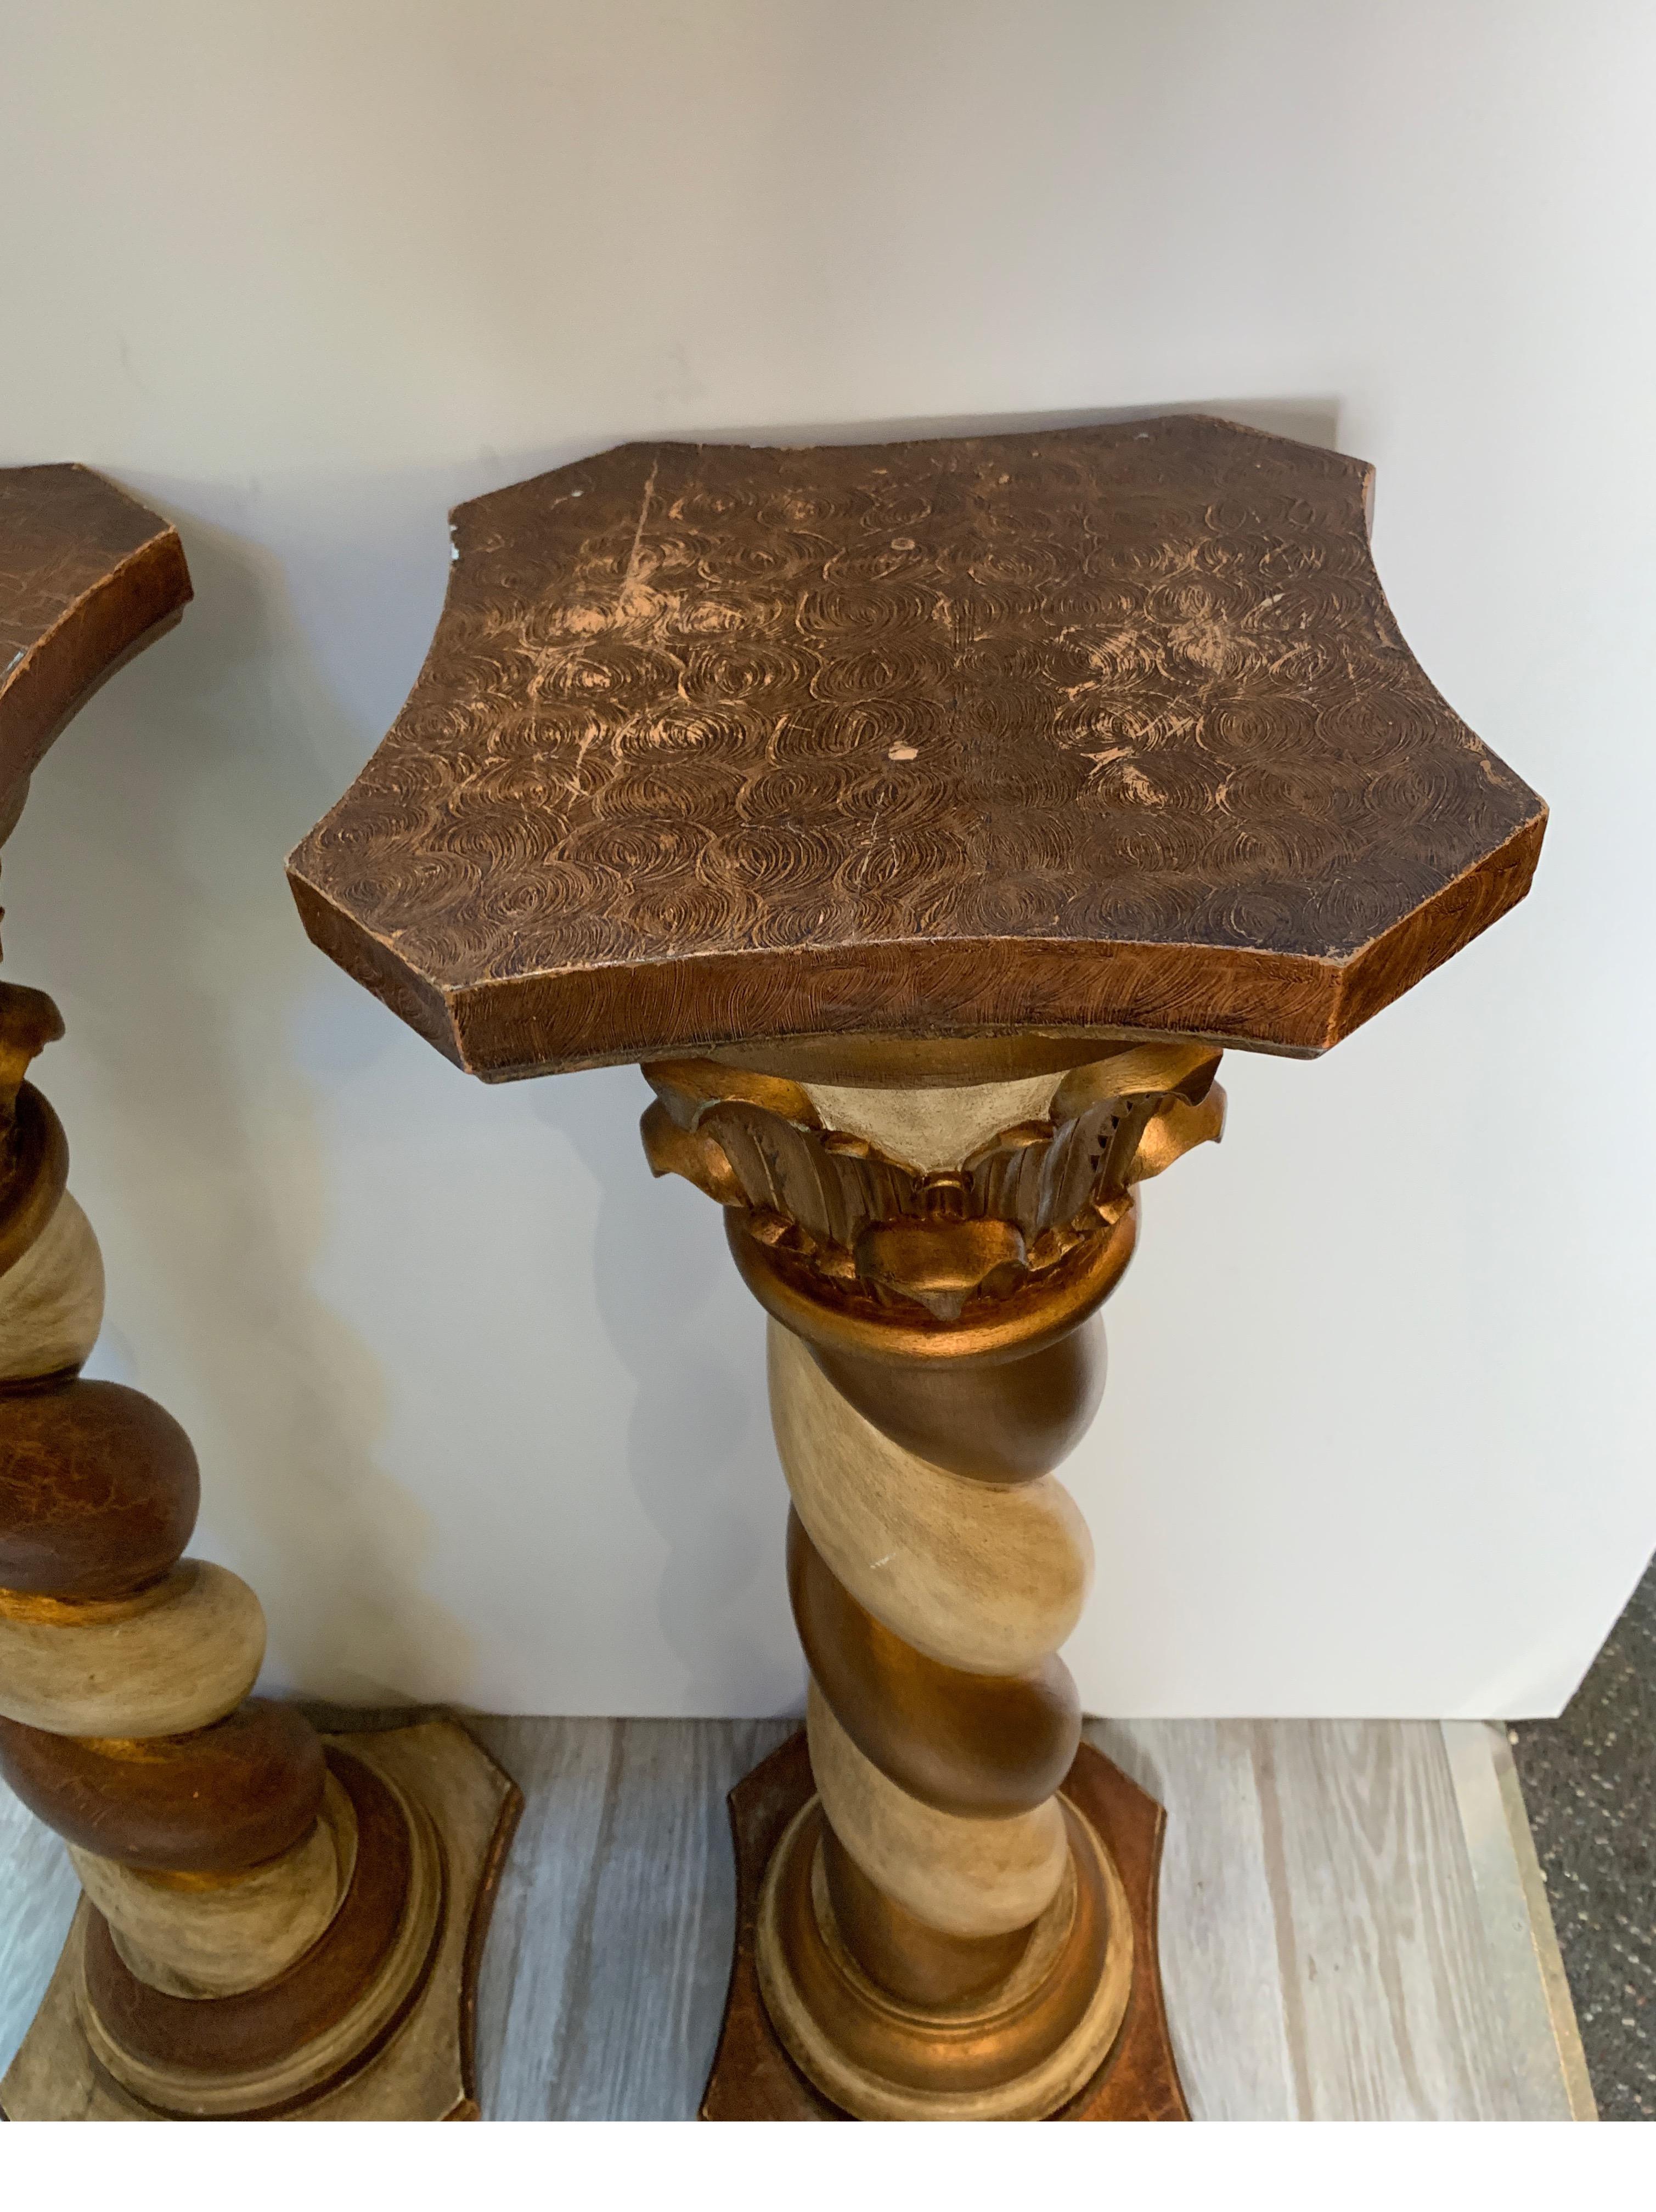 Midcentury Pair of Carved Wood Pedestals with Decorative Faux Painting 1